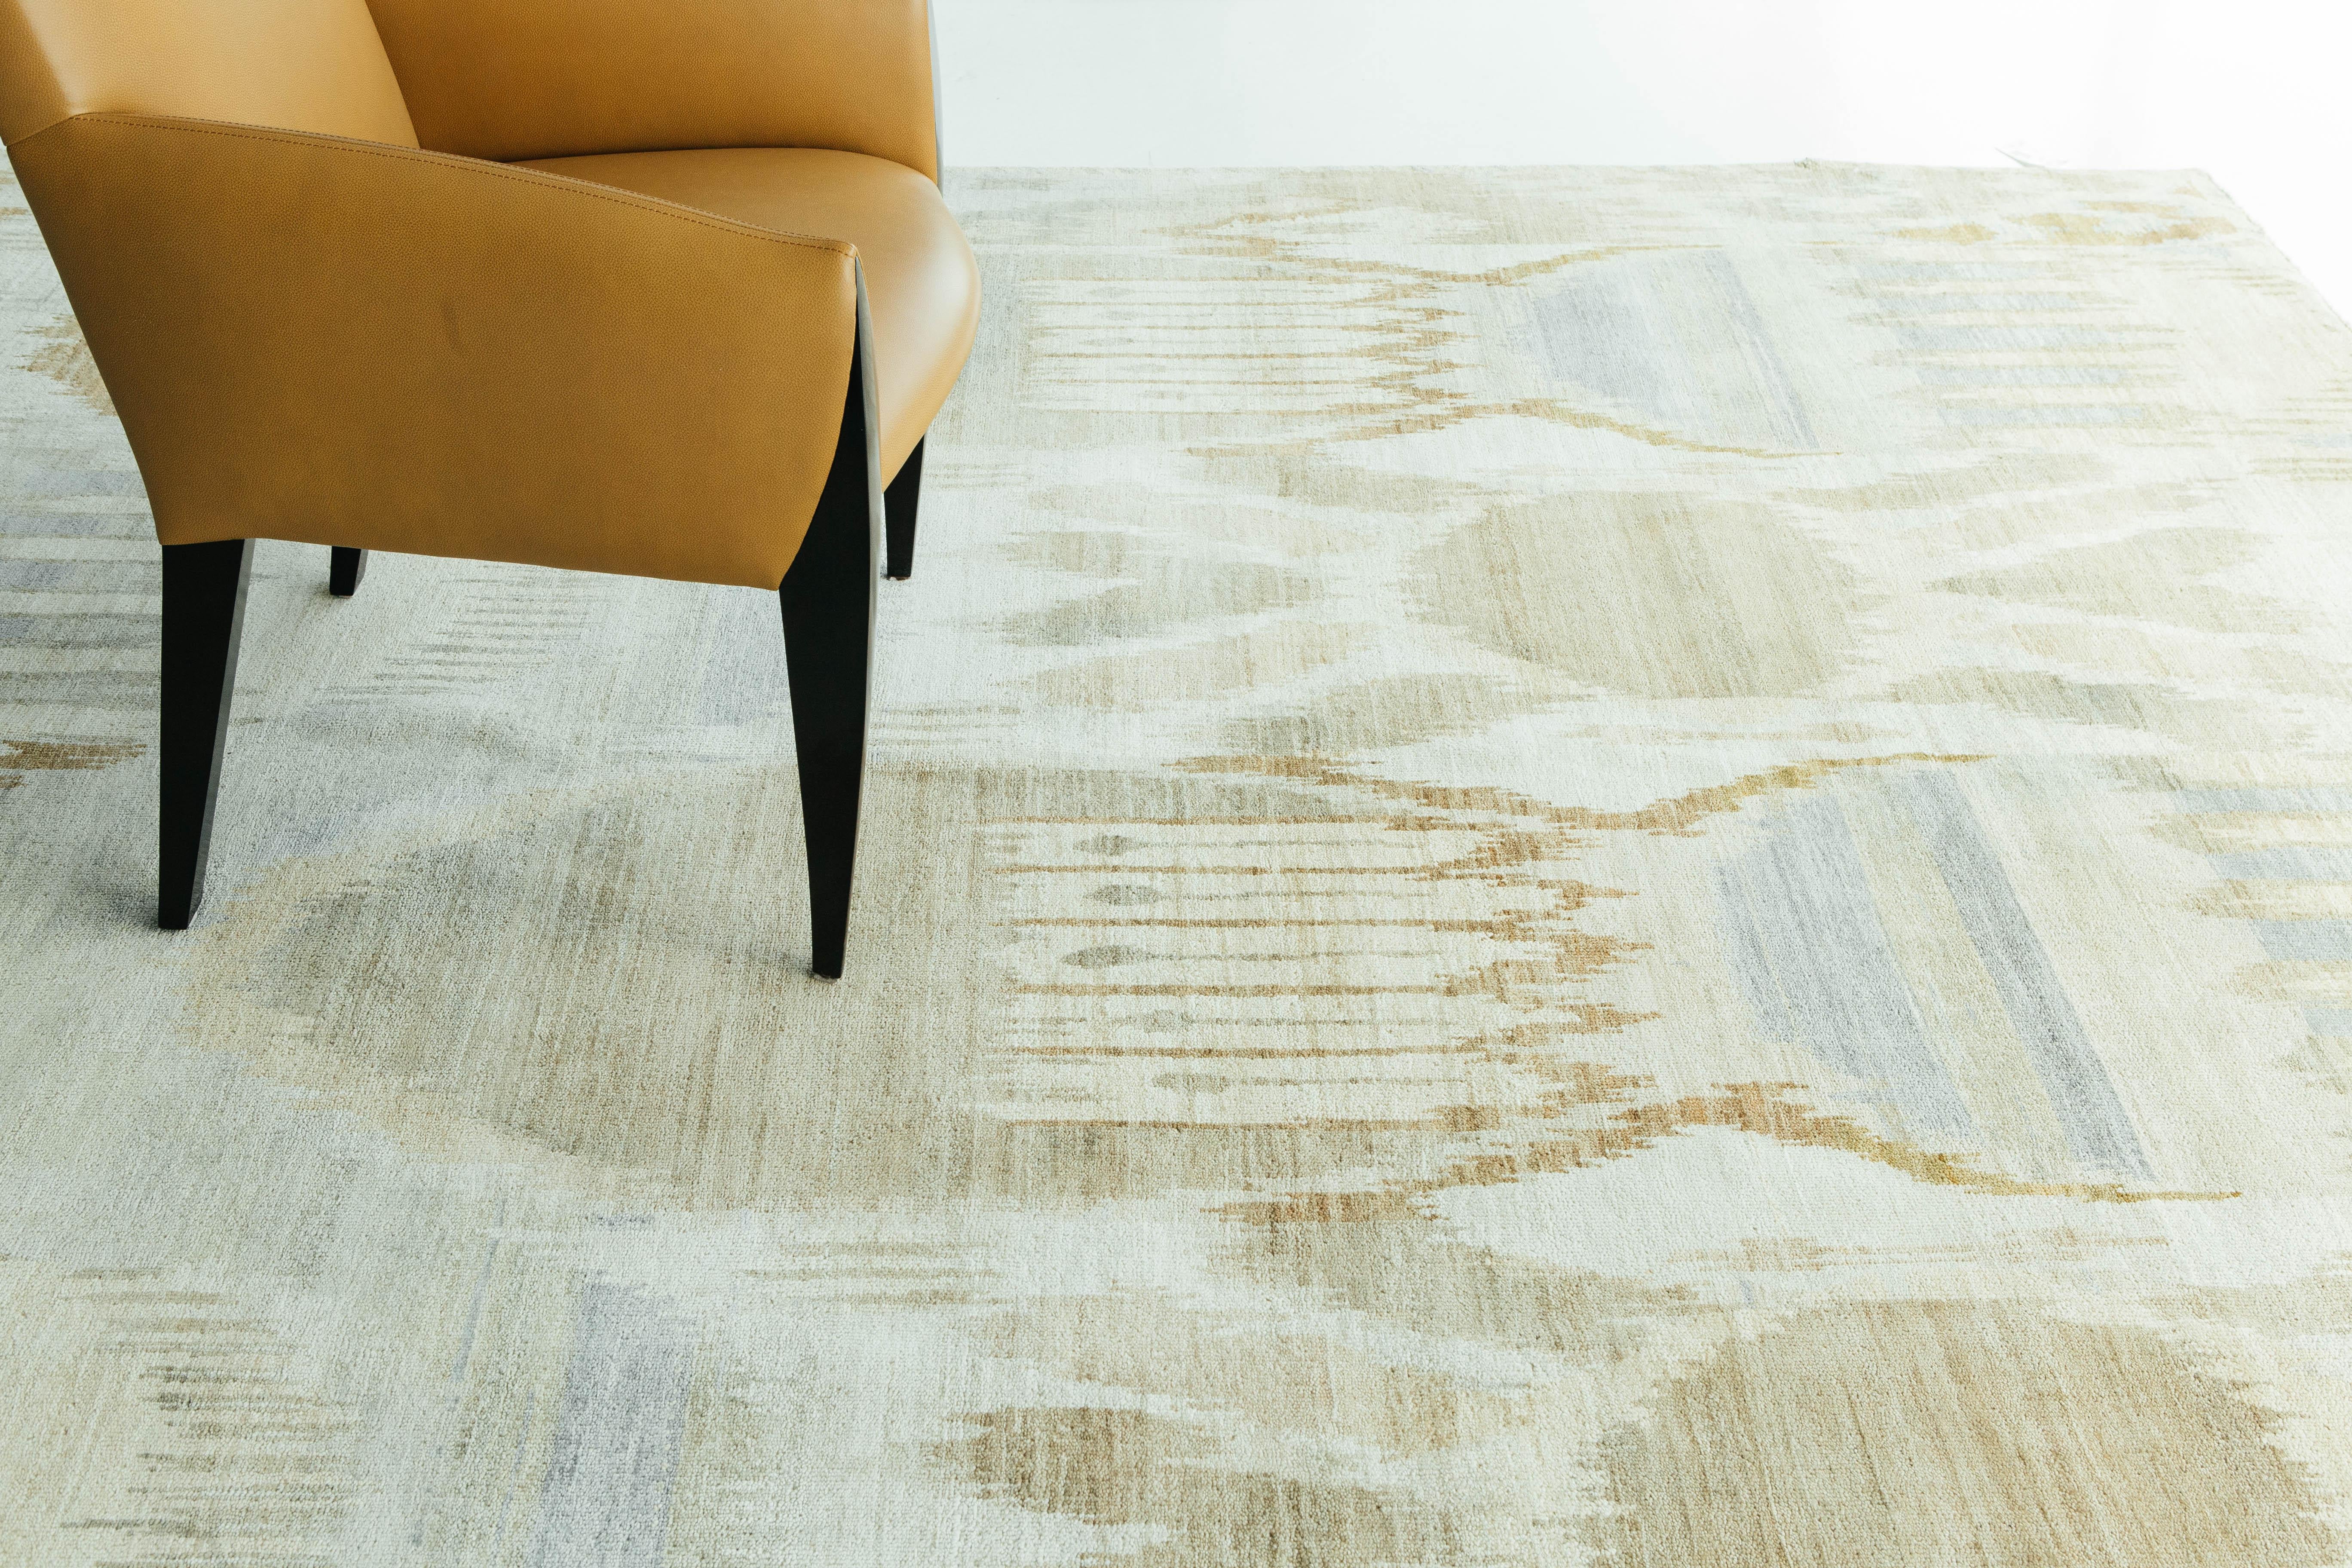 'Chayon' is a beautiful Ikat rug designed to be both playful and sophisticated. The rugs cohesive colors bring a calming aura to this wool pile weave. Ikat designs have been globally inspired for today's modern design world

Rug number: